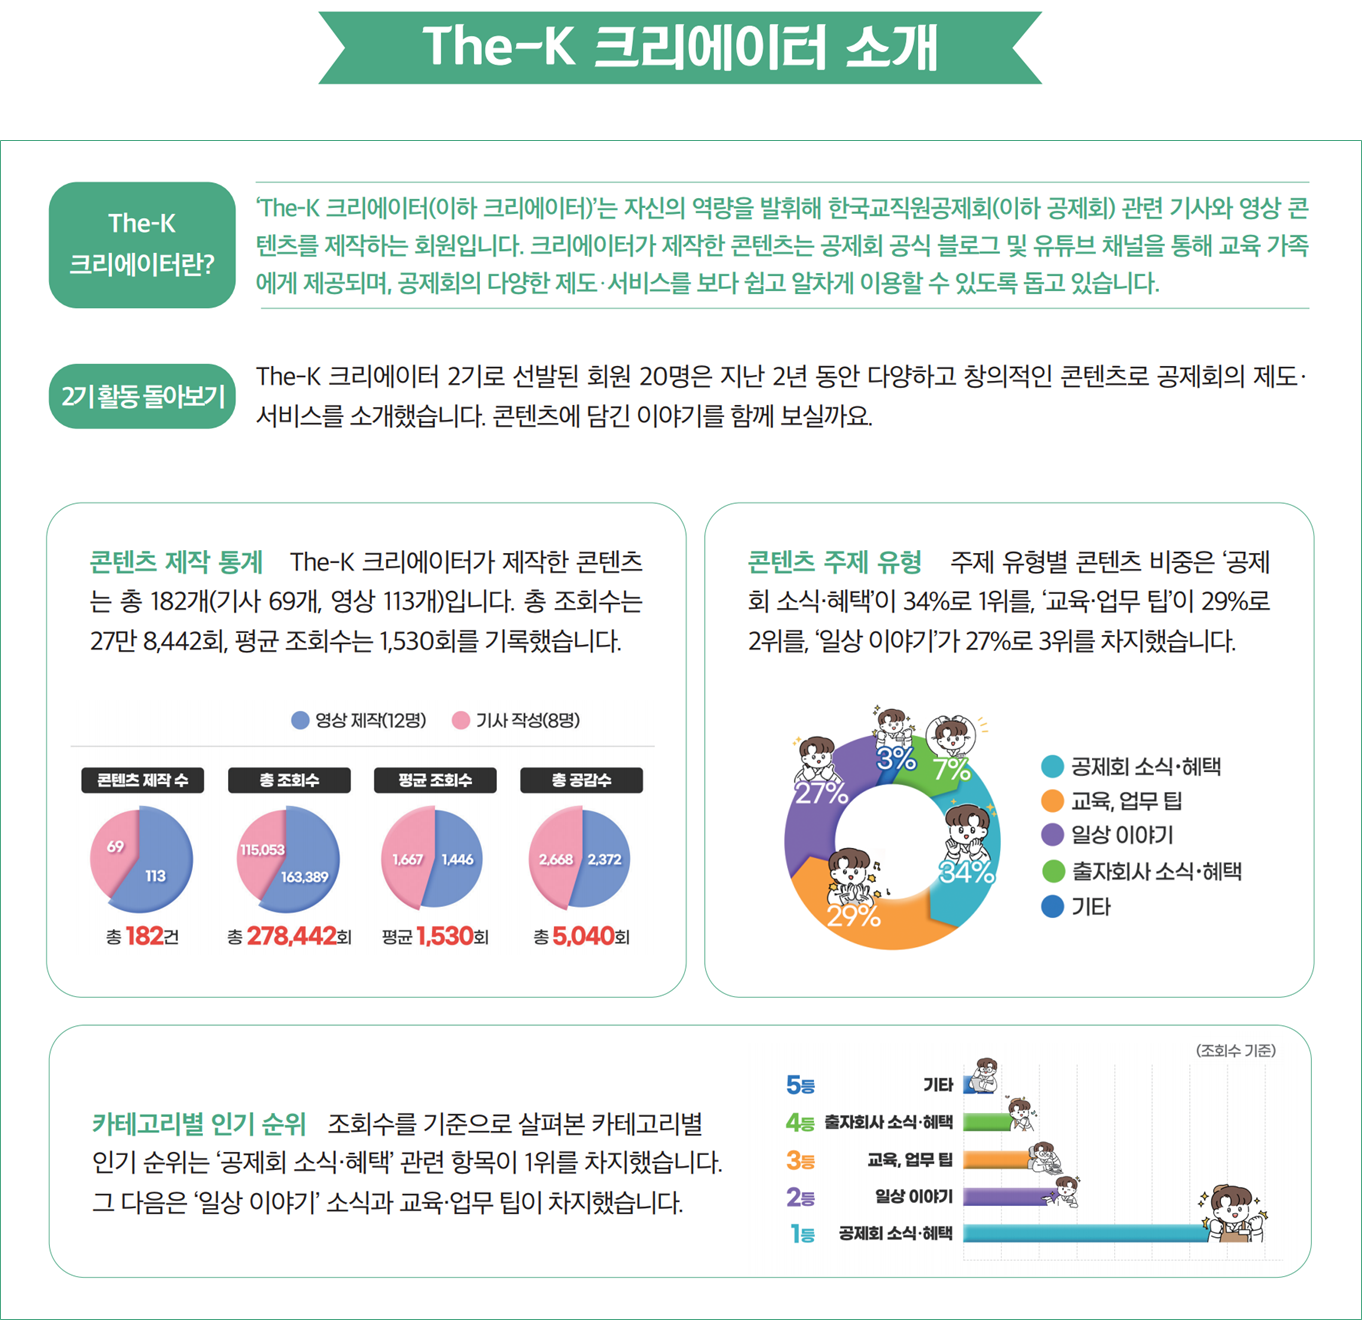 The-K 포커스 3_01